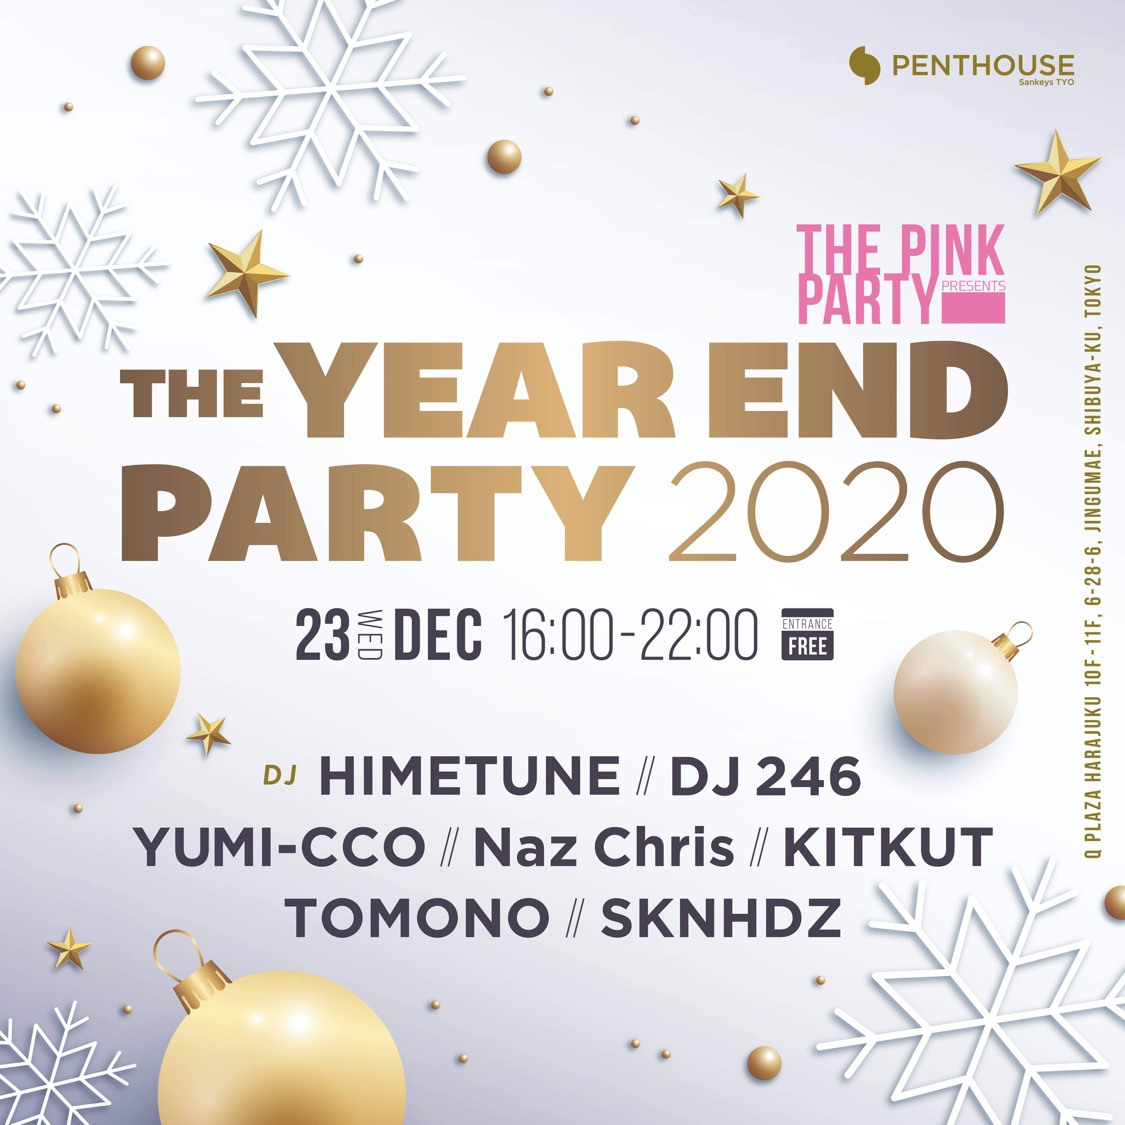 2020/12/23(wed) THE PINK PARTY 〜The Year End Party 2020〜